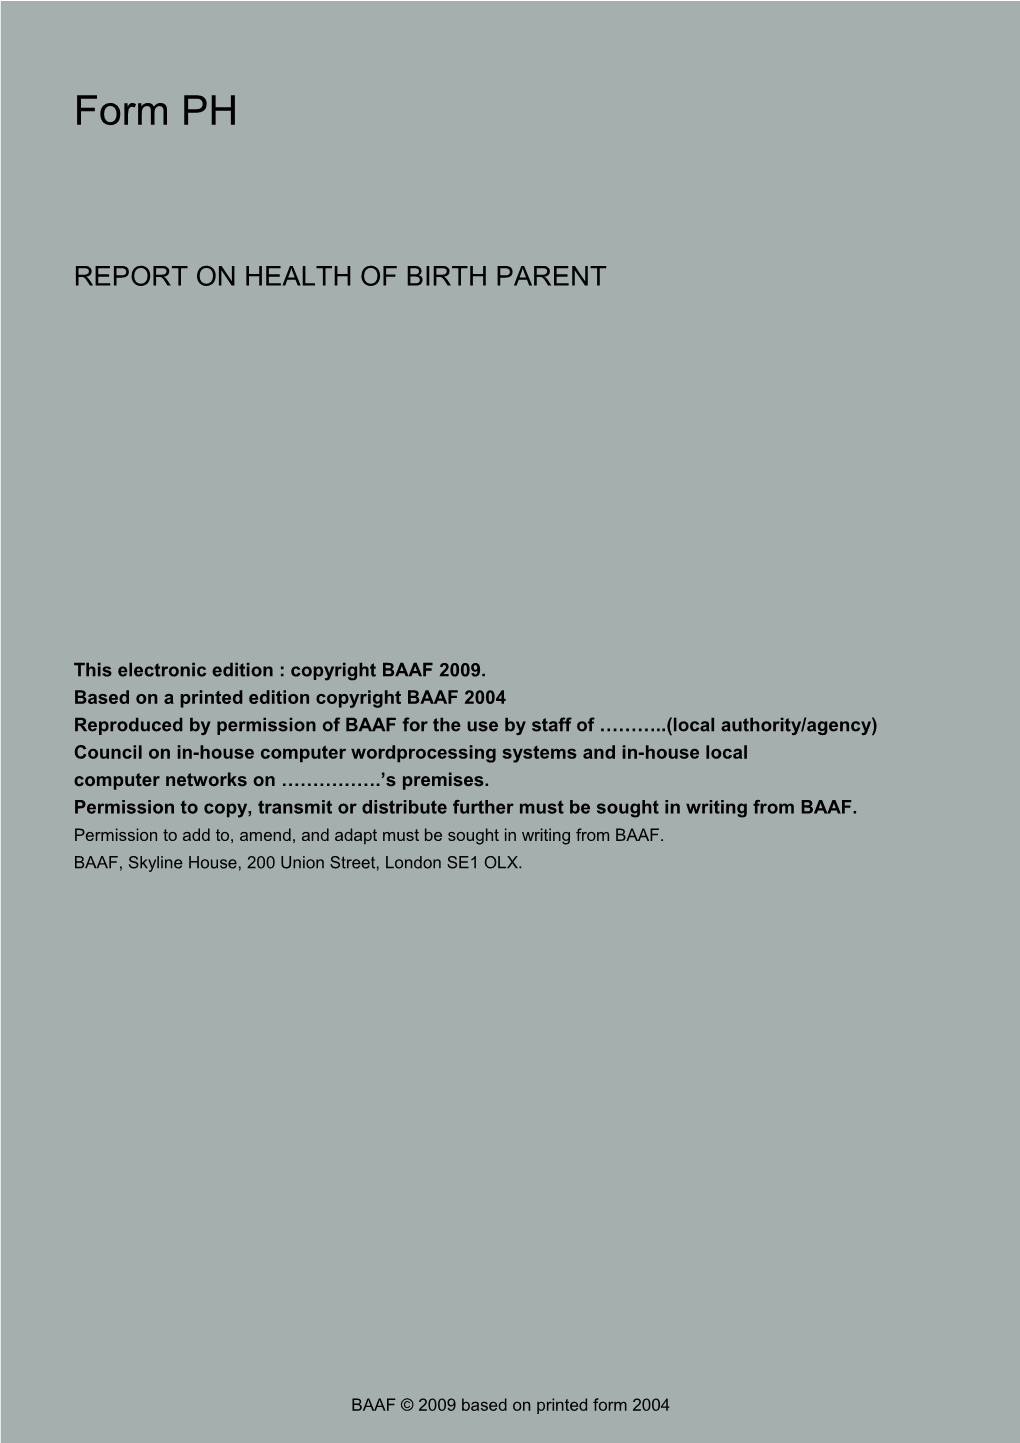 Report on Health of Birth Parent